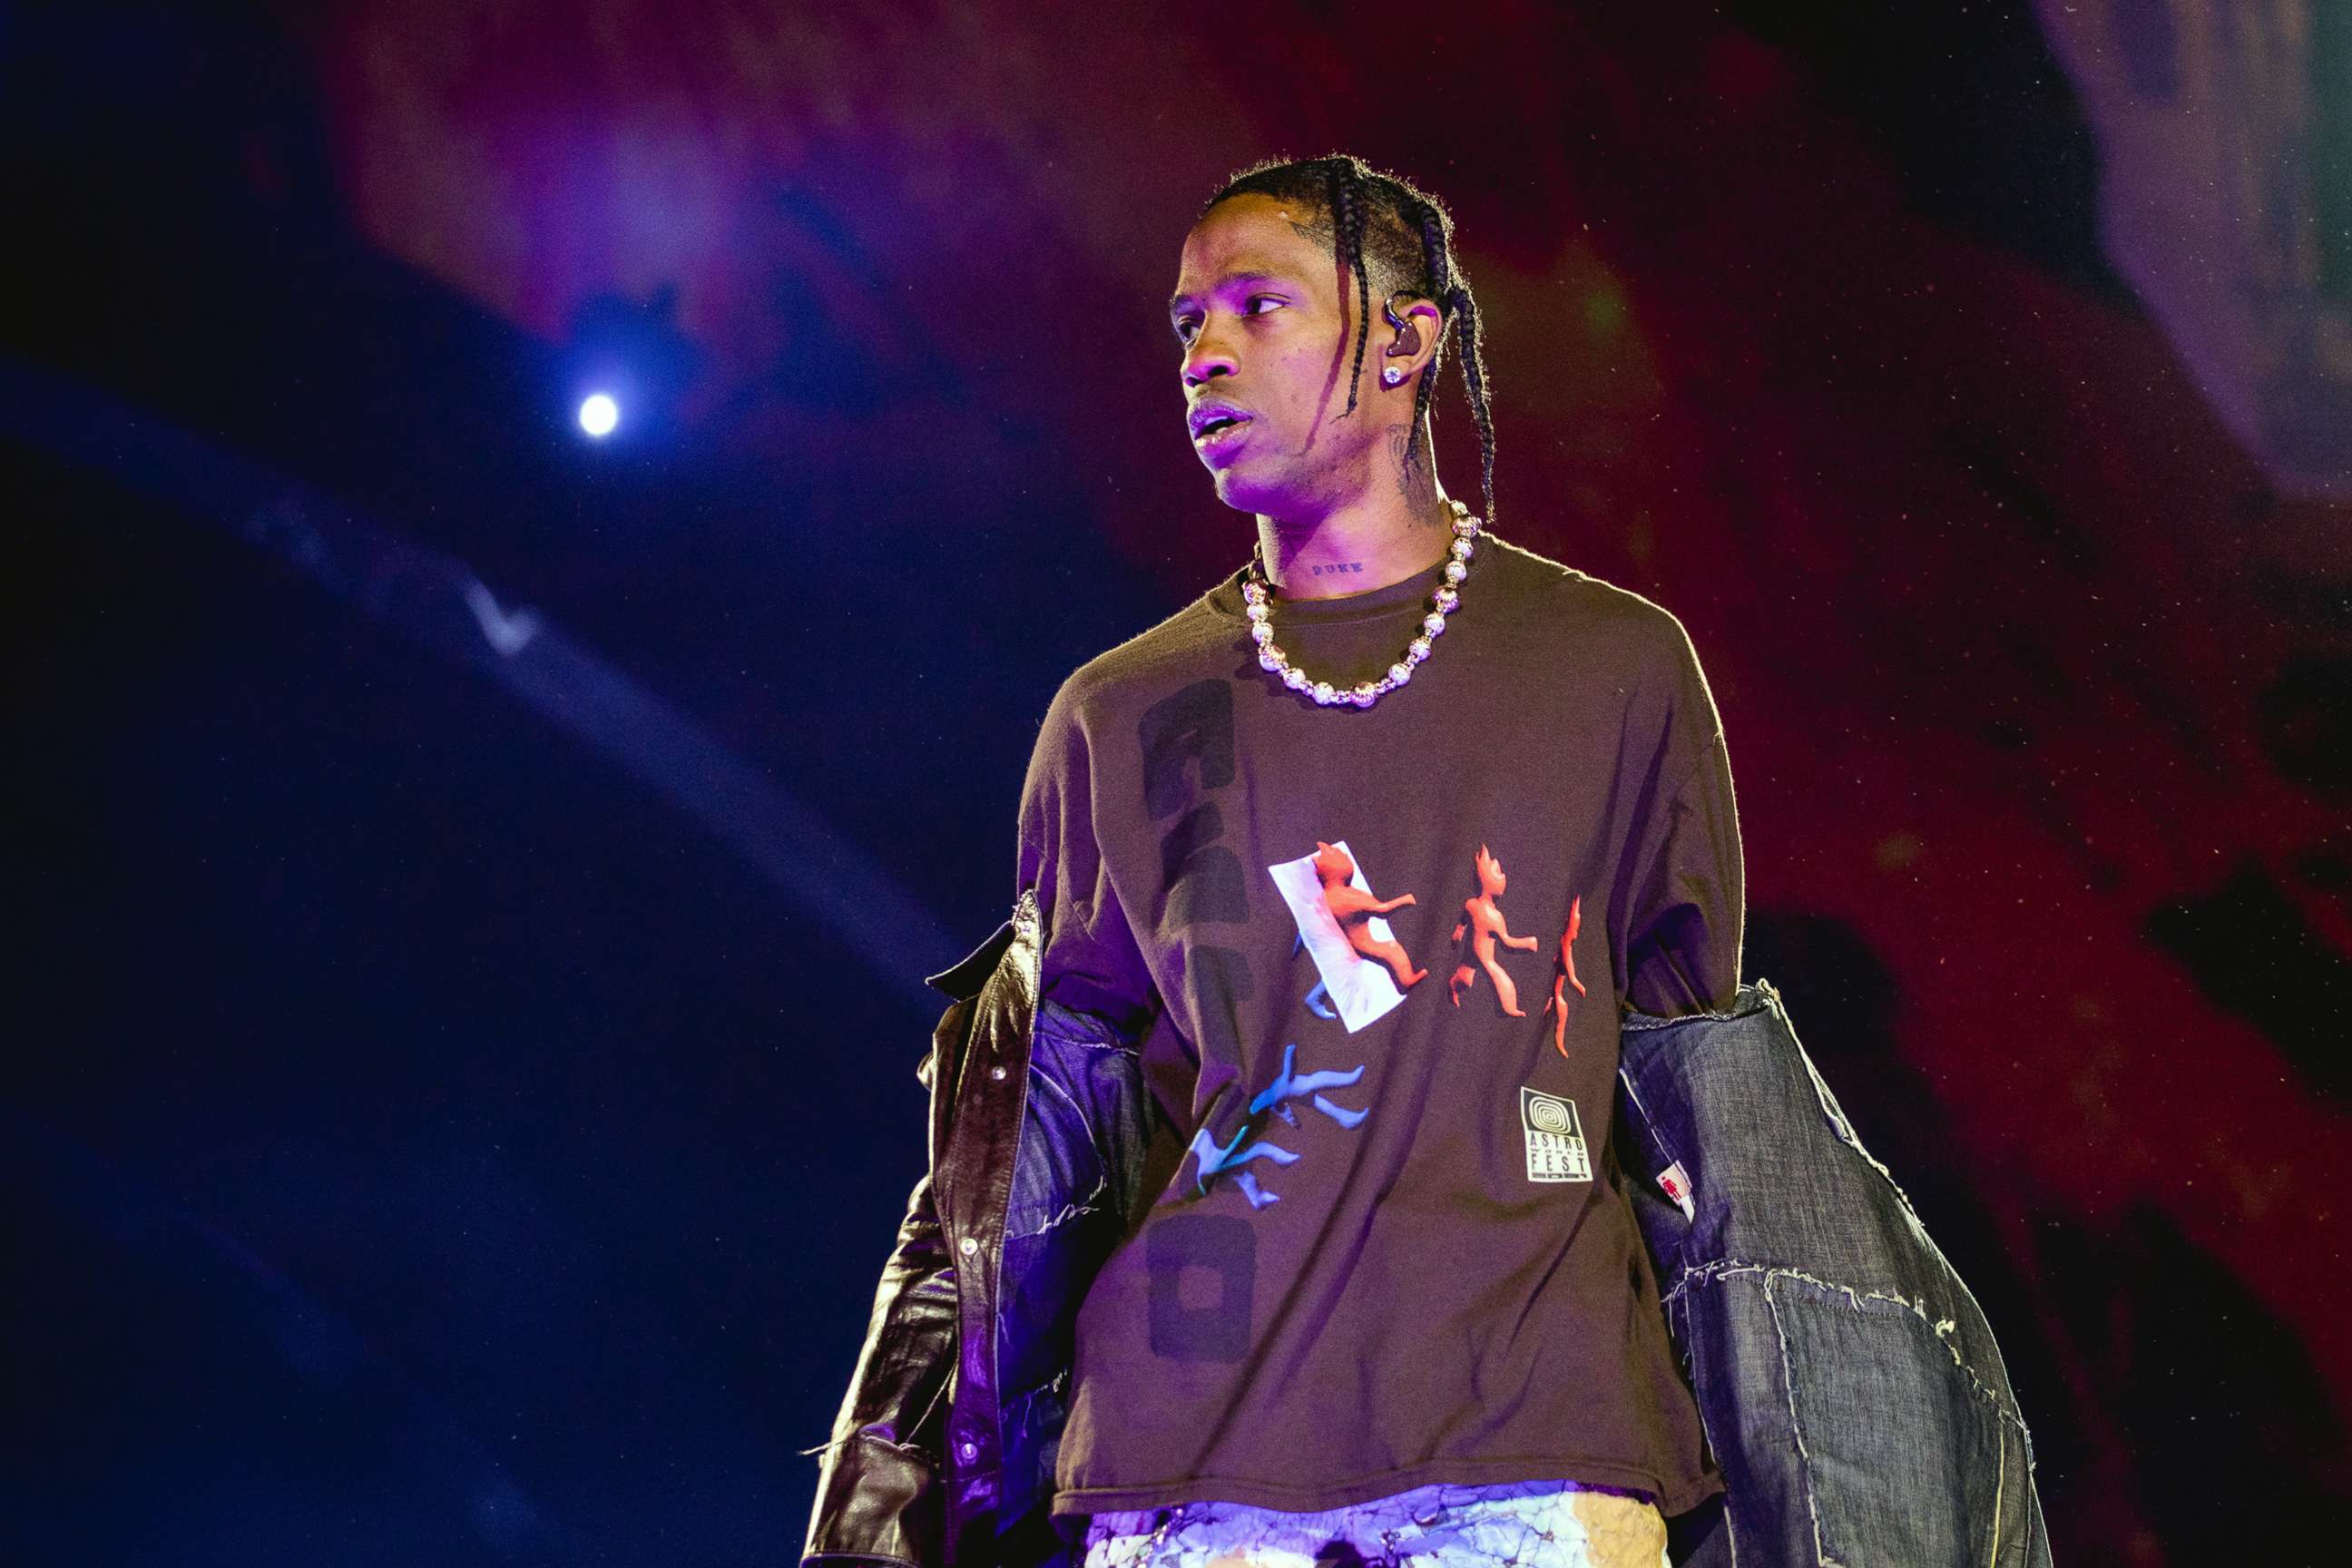 Man claims rapper Travis Scott punched him at nightclub: Police